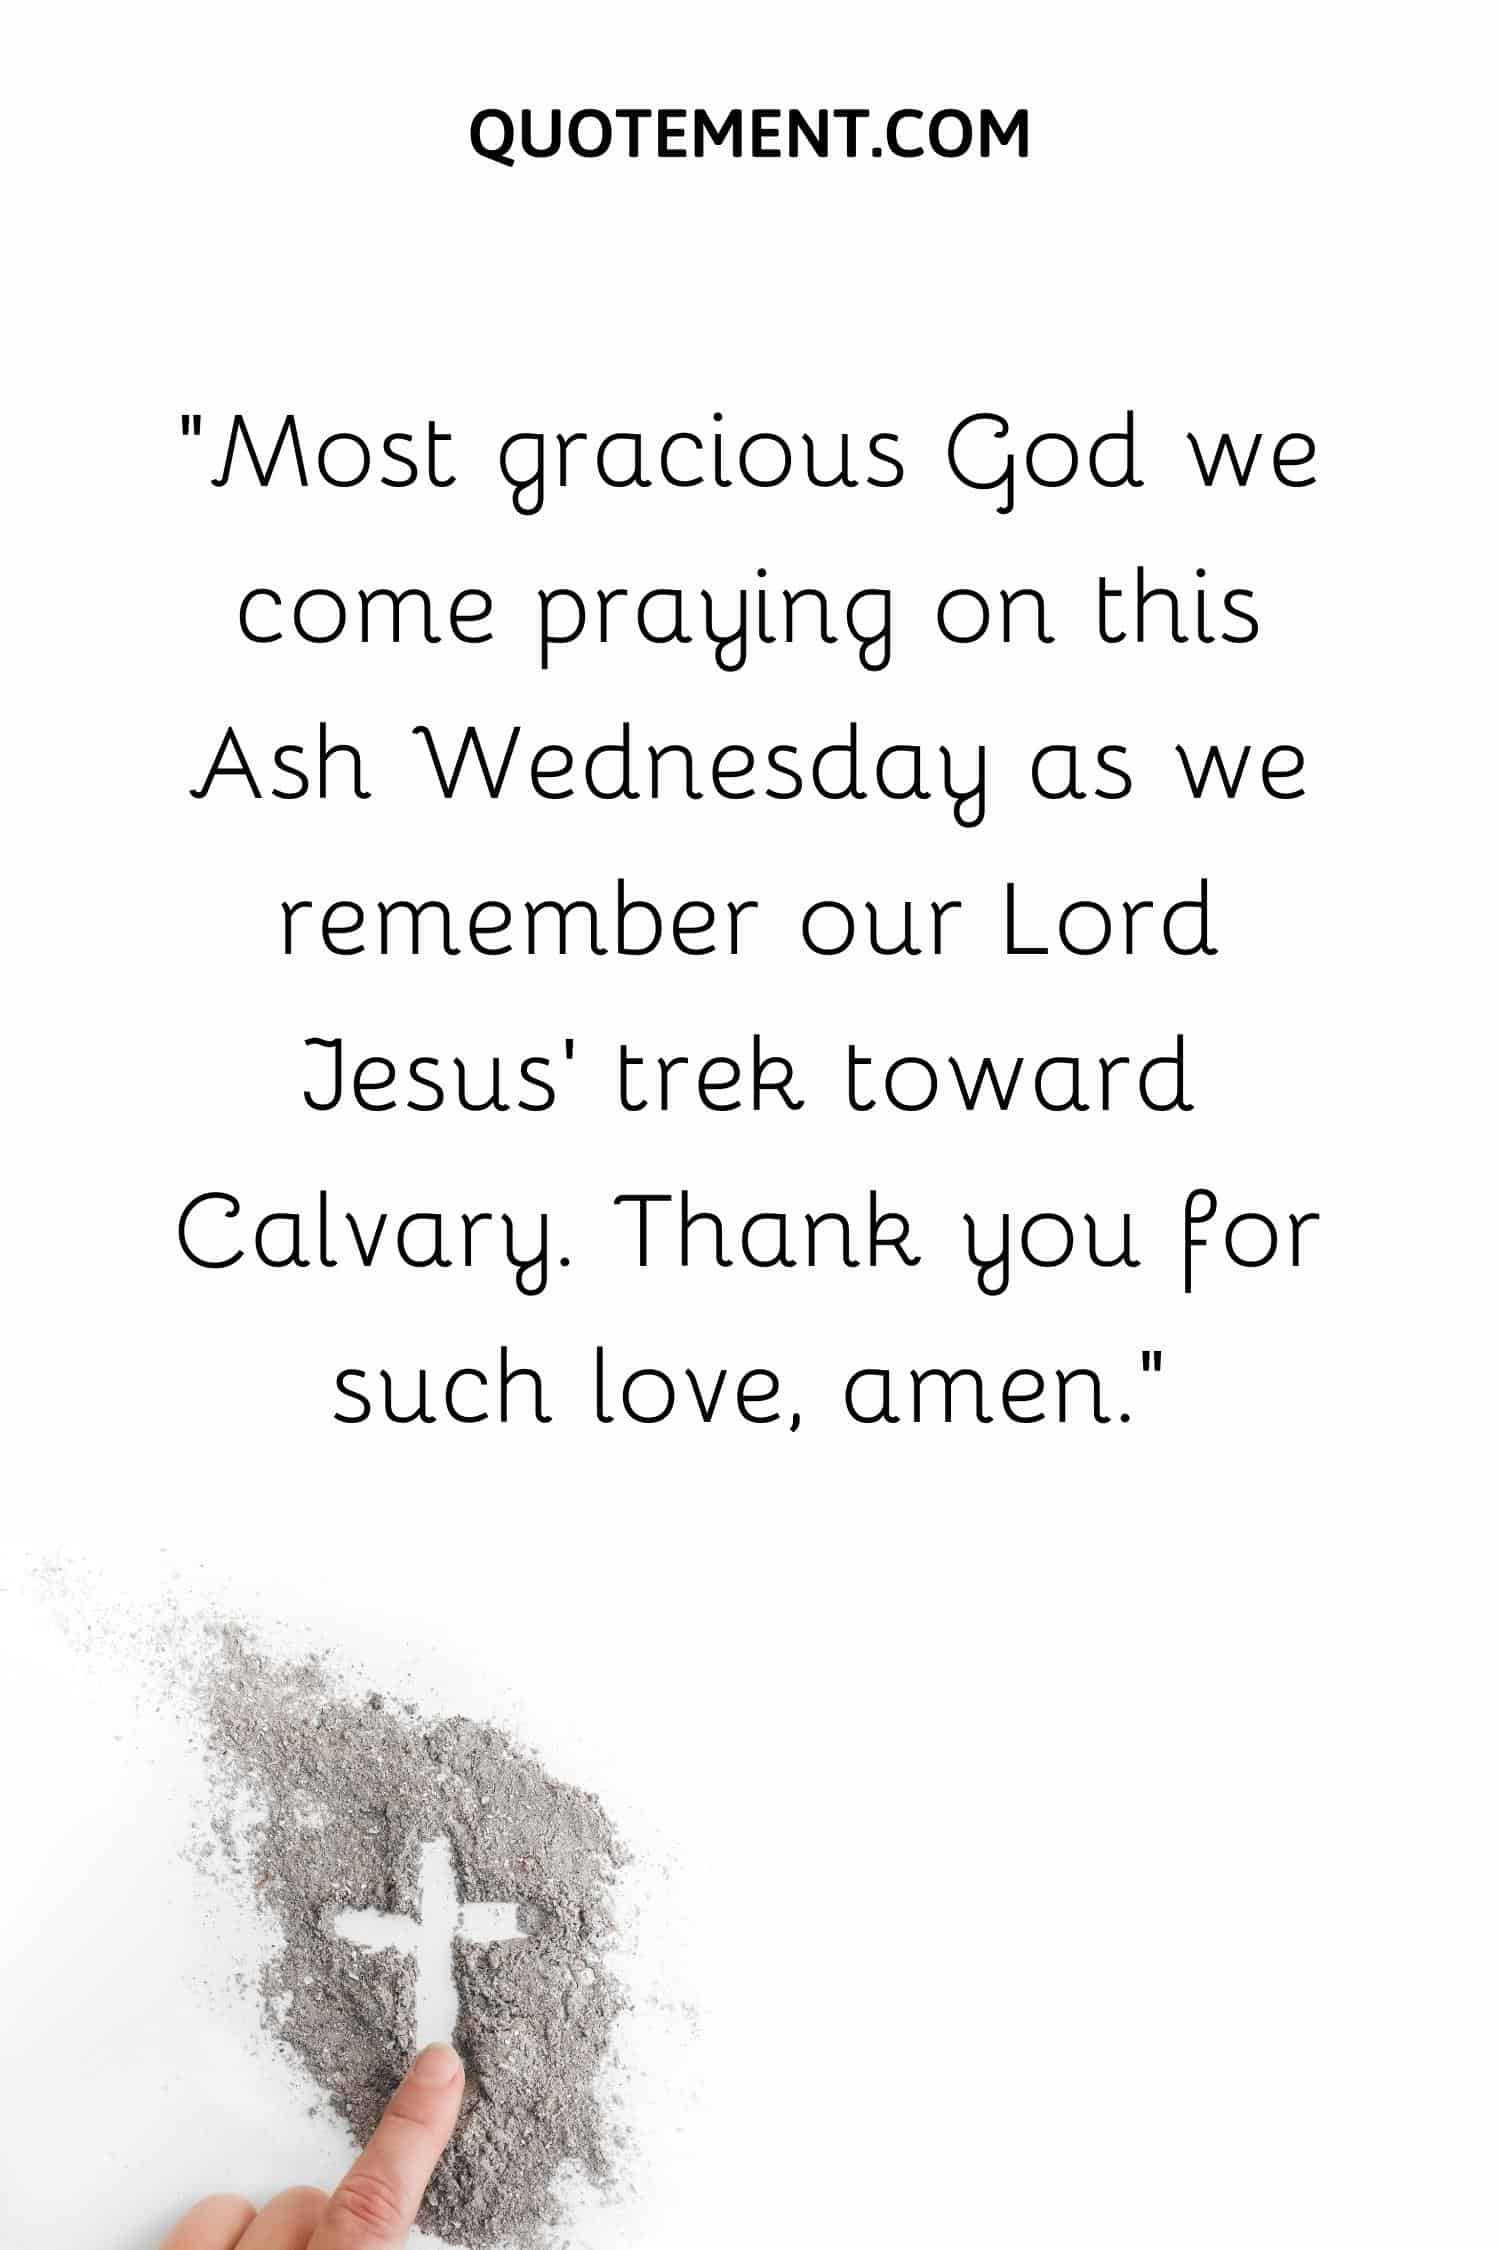 Most gracious God we come praying on this Ash Wednesday